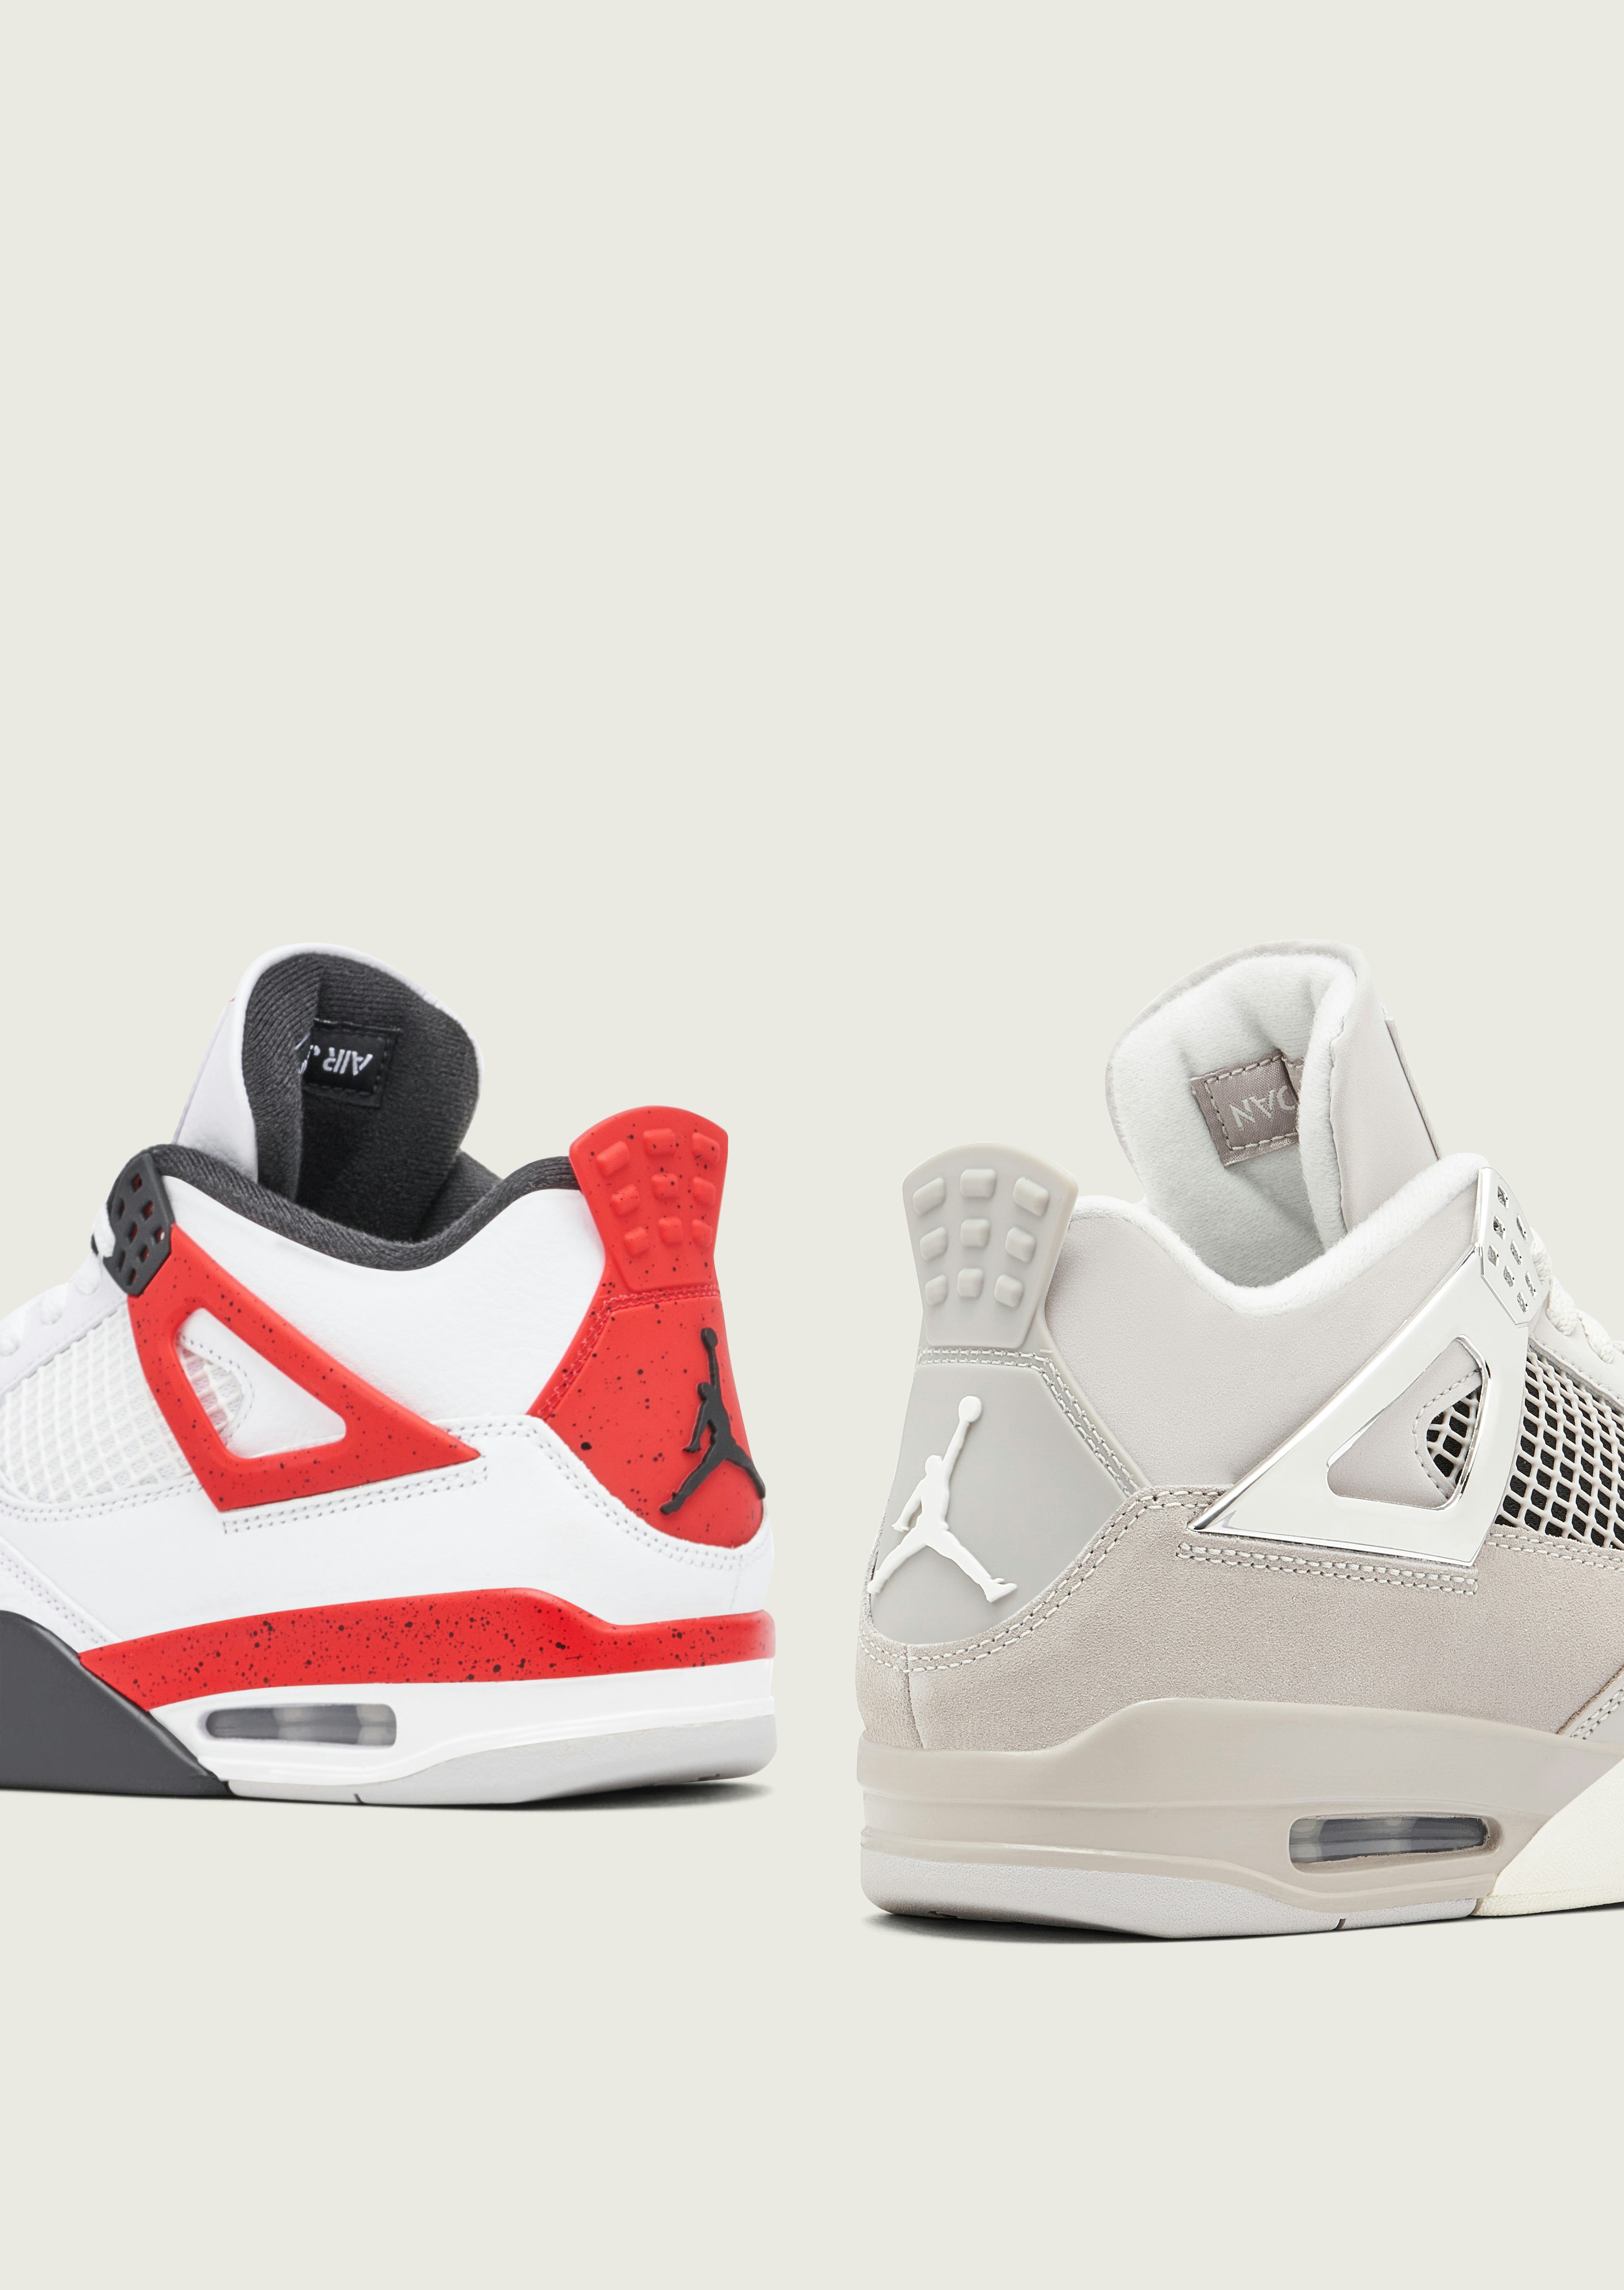 Cheap Ietp Jordan outlet, Buy and Sell Sneakers Online